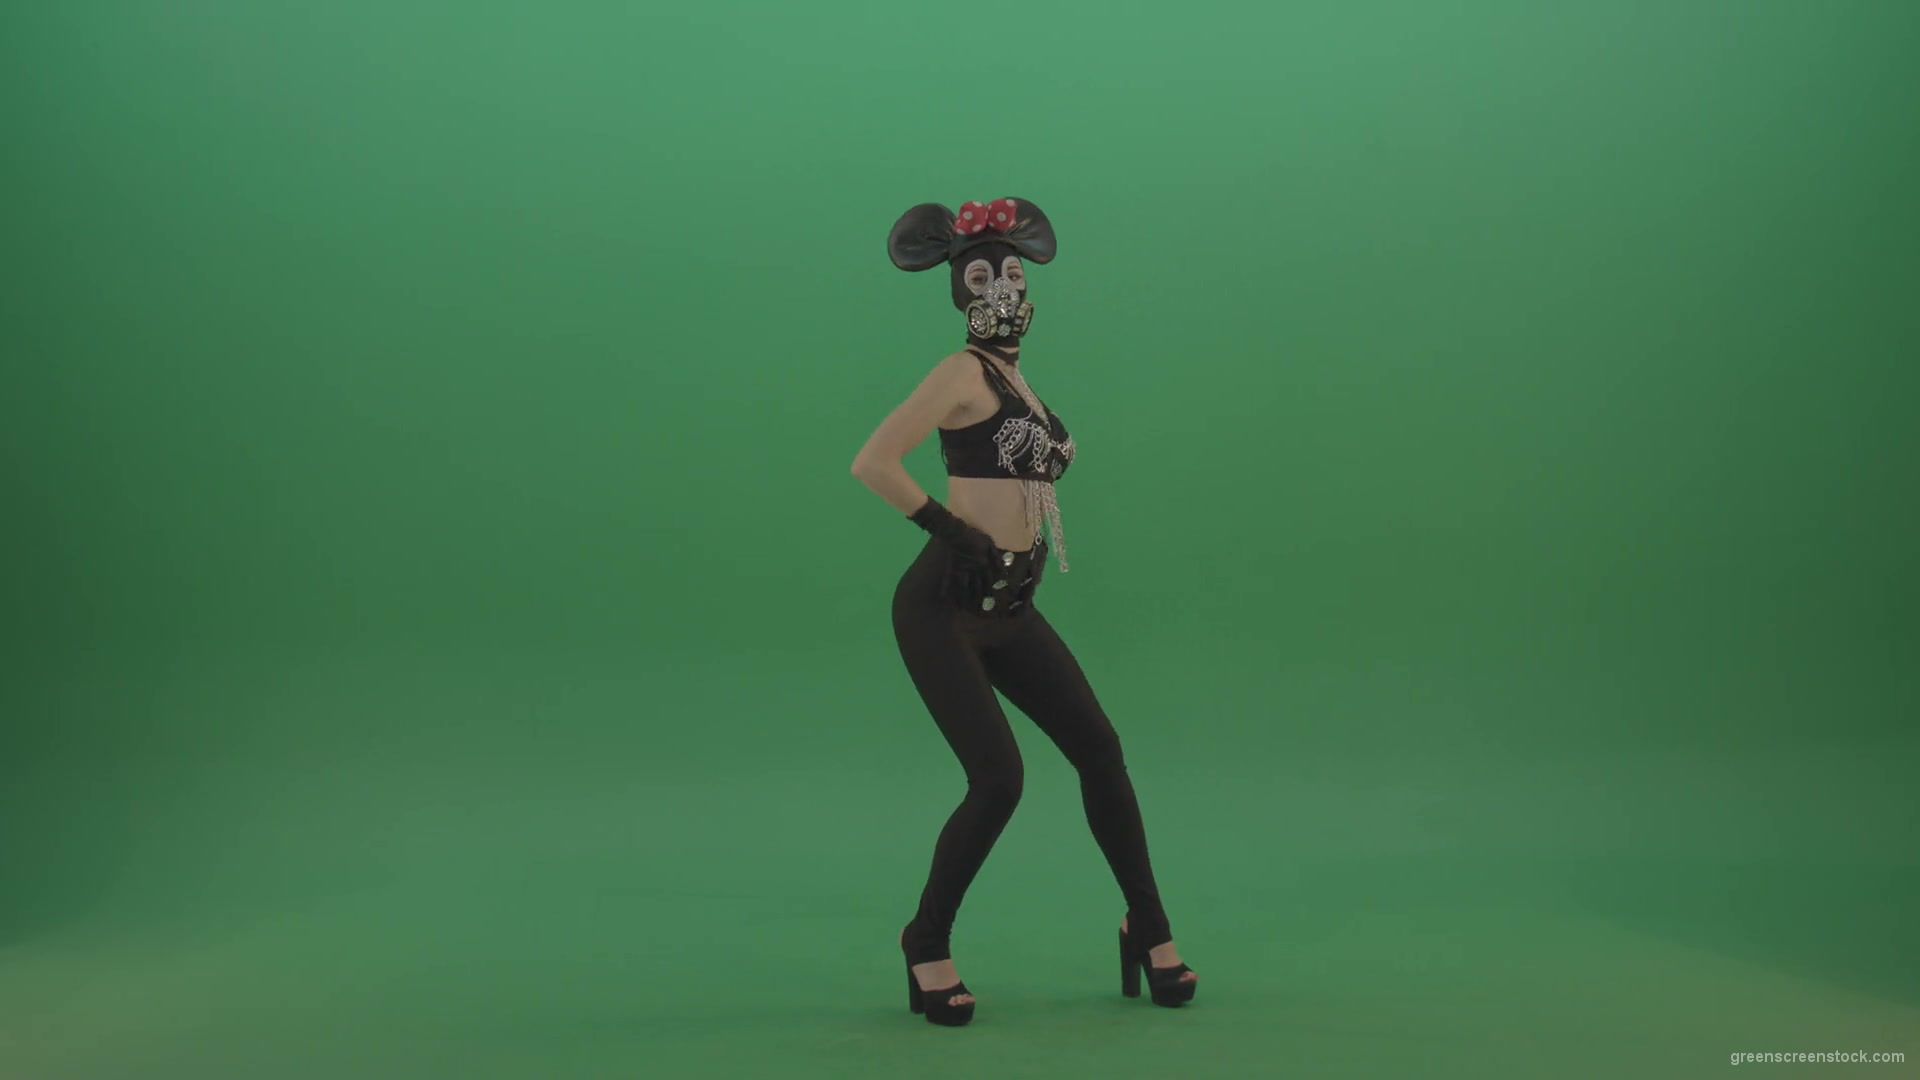 Sexy-dancing-mouse-girl-slowly-dance-in-mask-on-green-screen-1920_008 Green Screen Stock